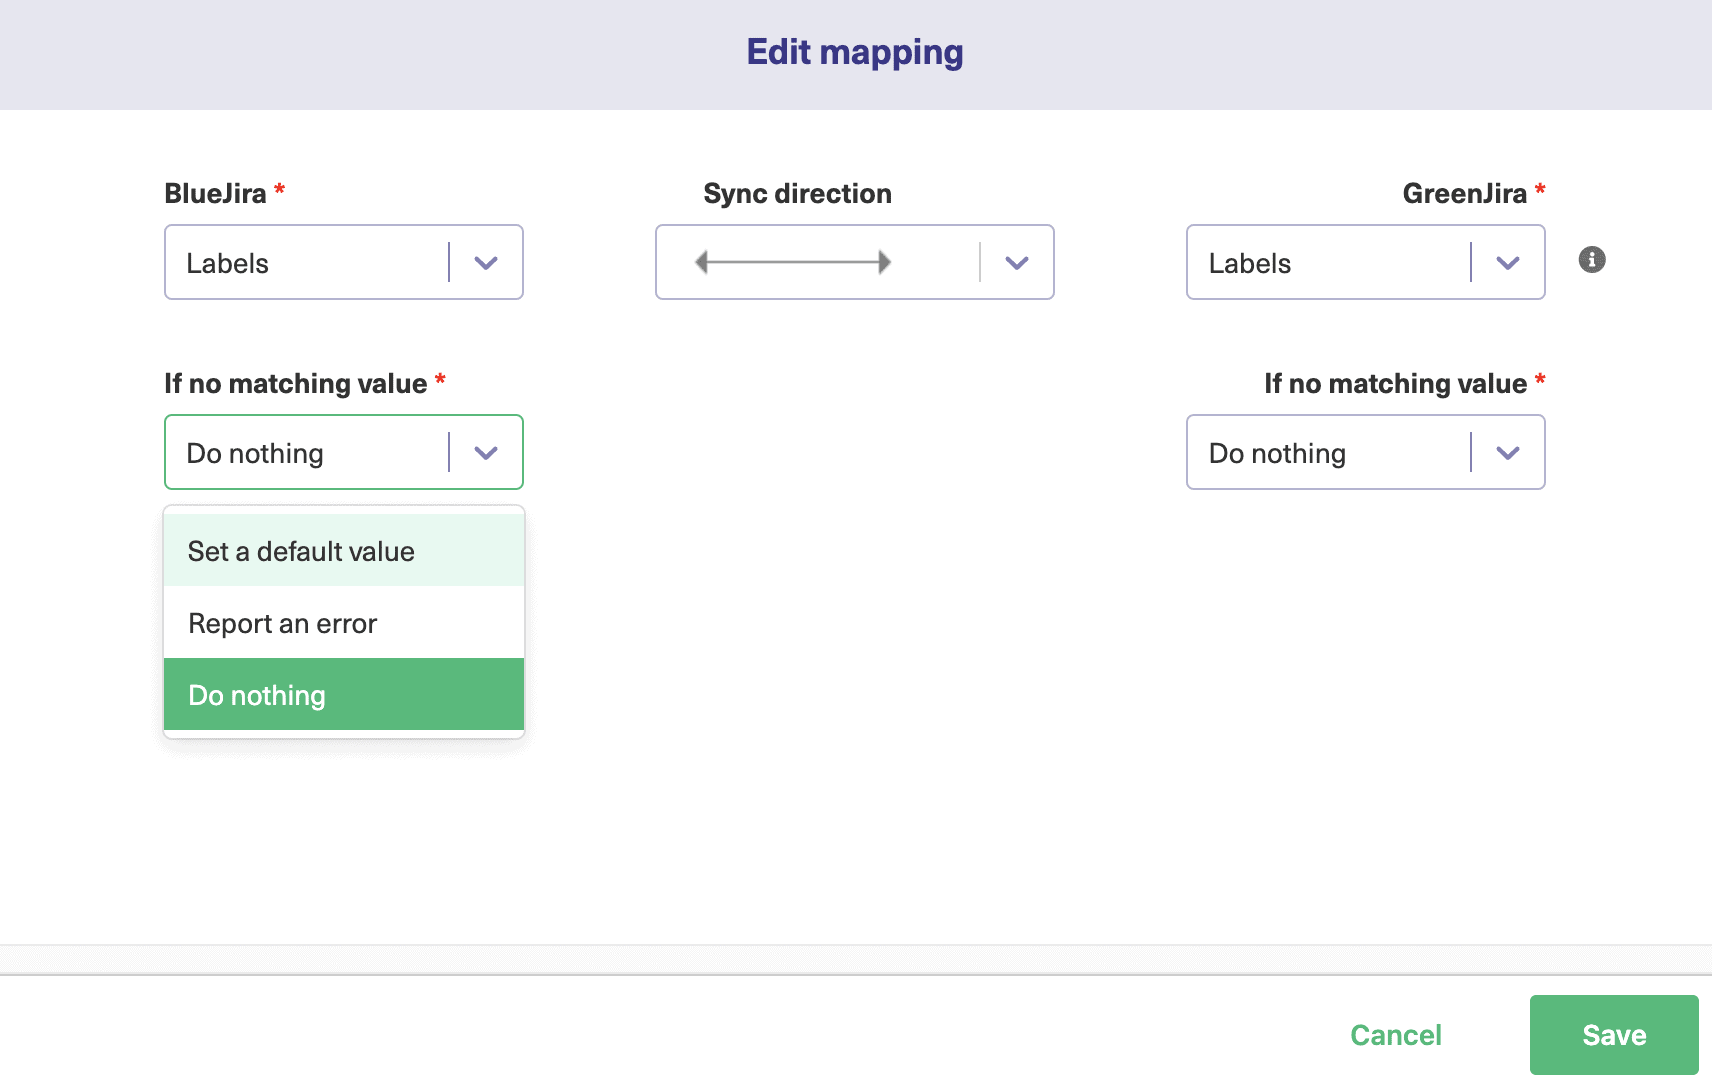 Edit mapping screen in visual mode